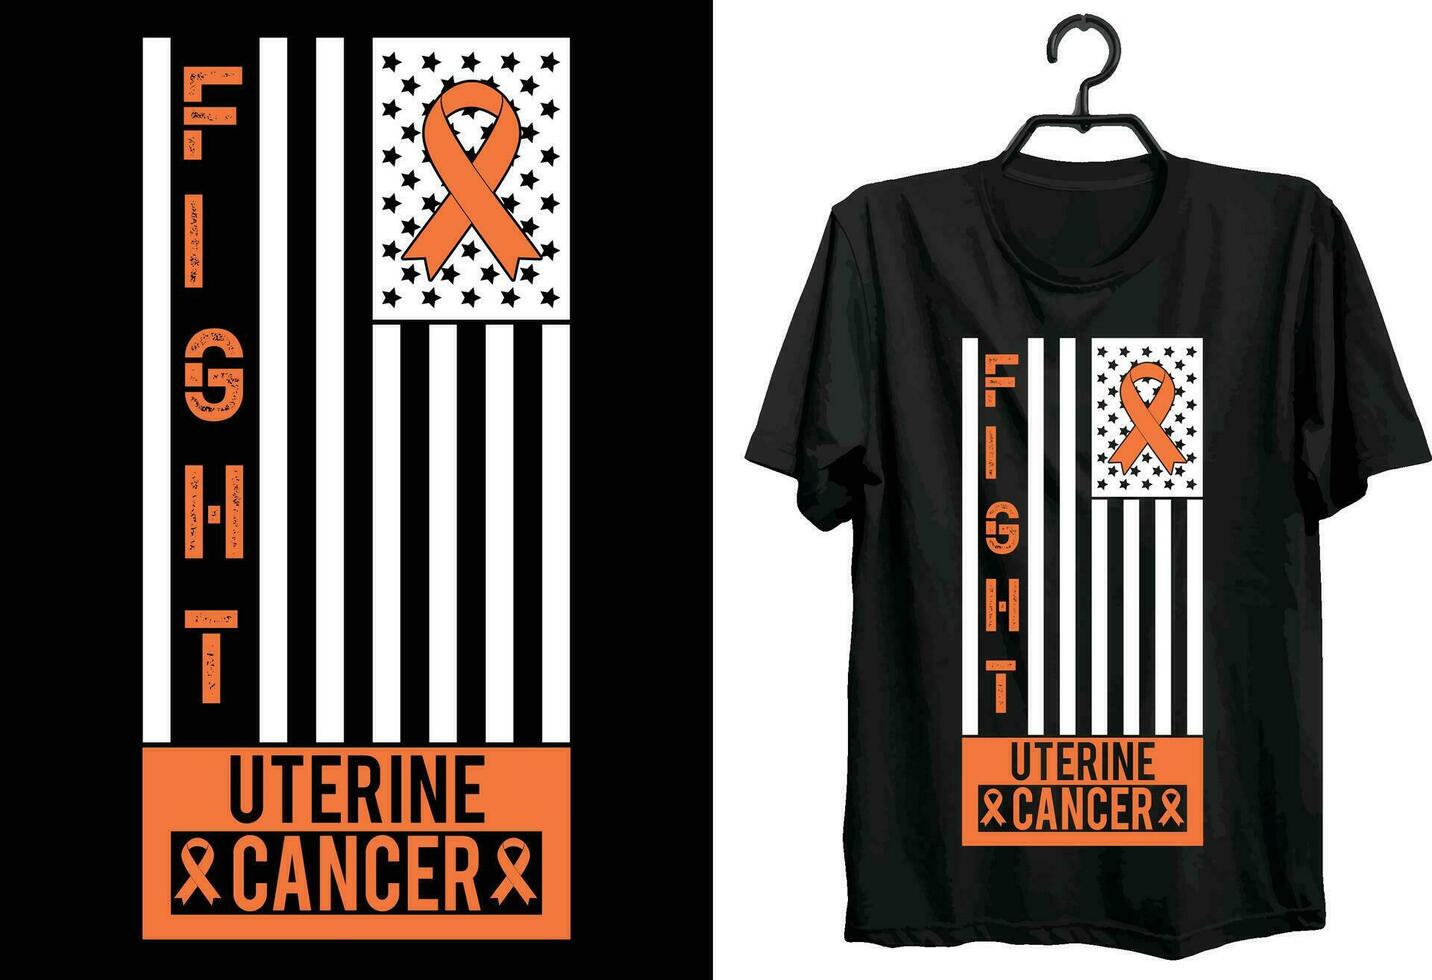 Fight Uterine Cancer. Uterine Cancer T-shirt Design. Funny Gift Item Uterine Cancer T-shirt Design For Patient. vector